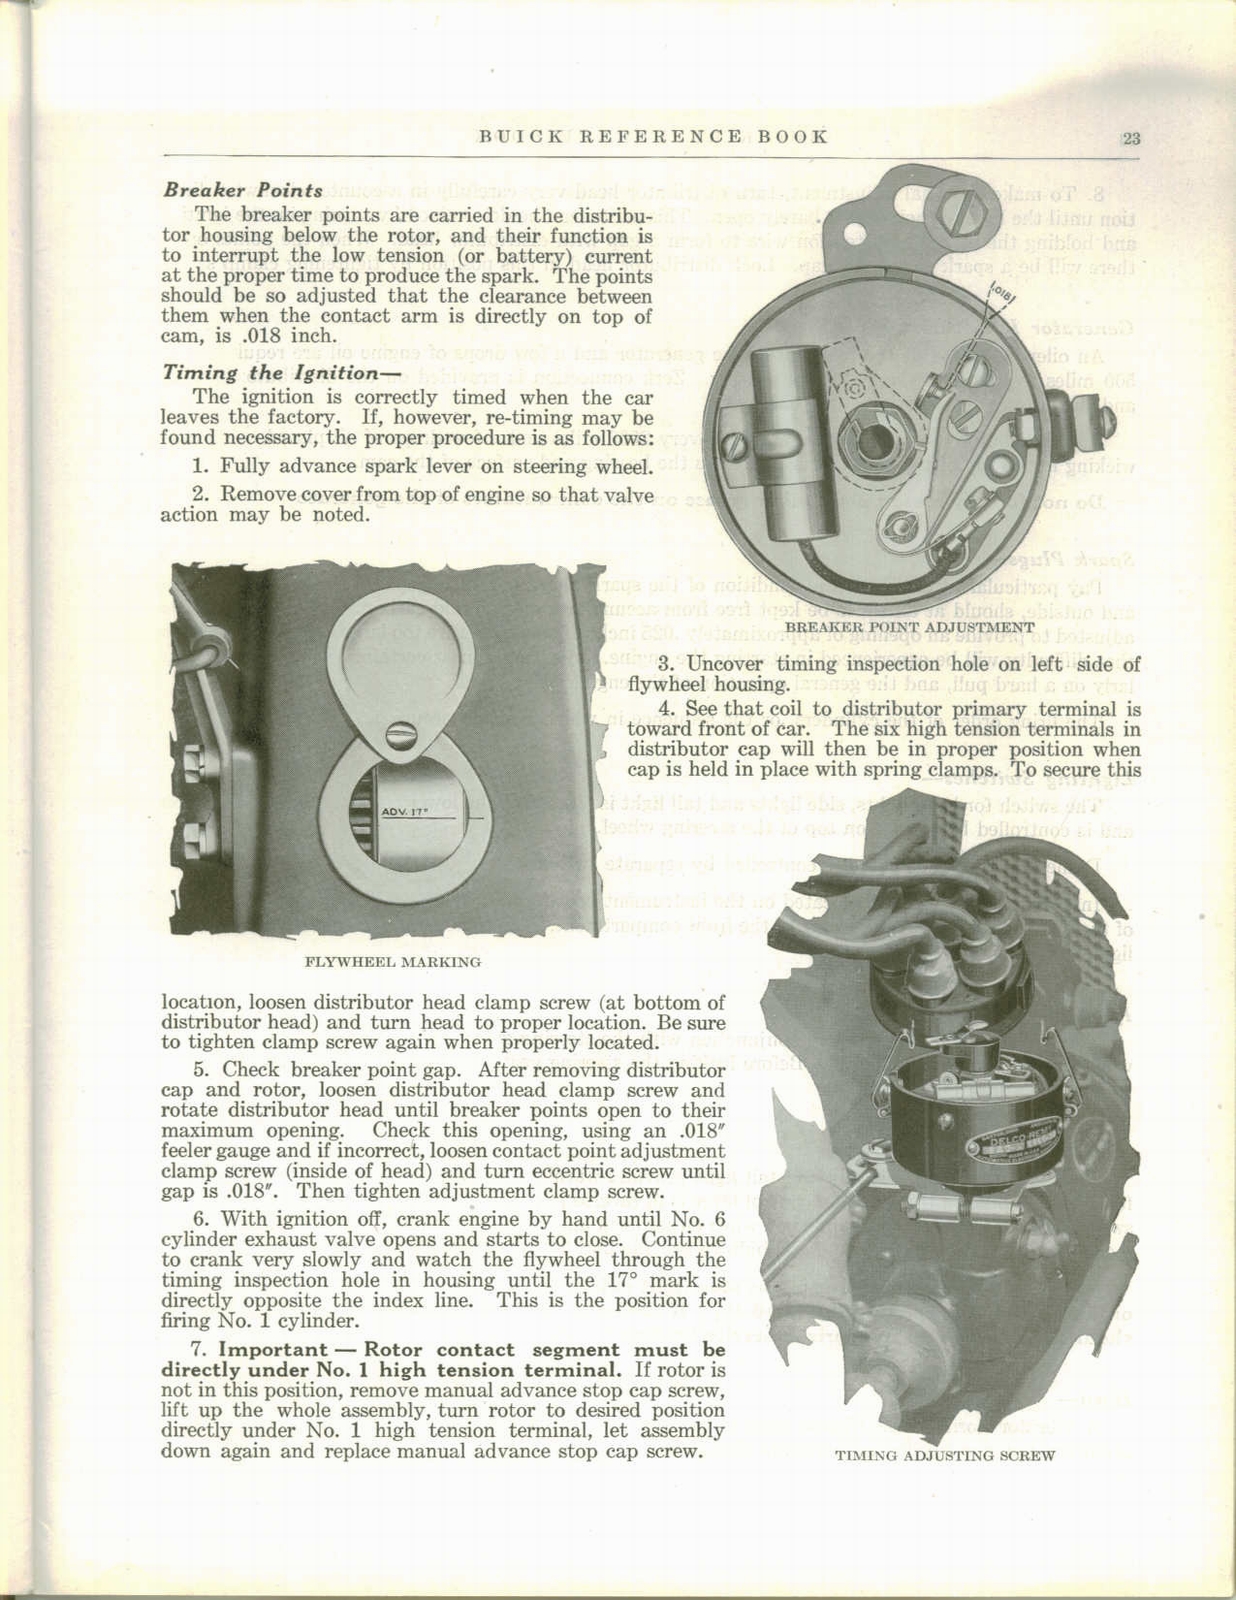 n_1928 Buick Reference Book-23.jpg